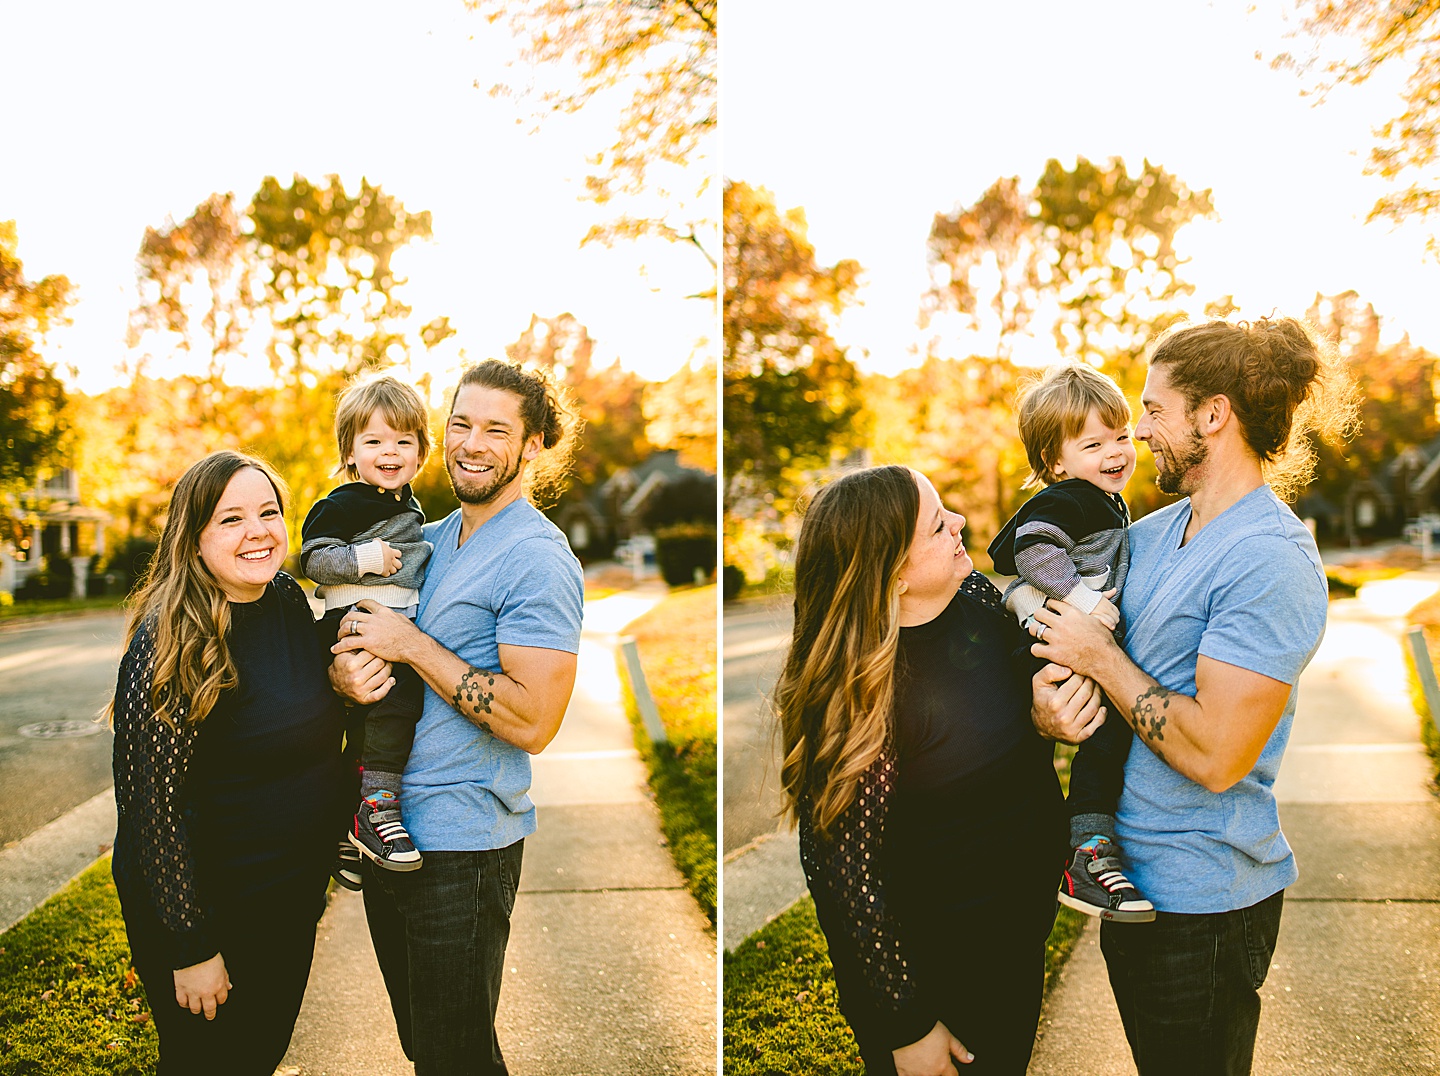 Family portraits outside in autumn